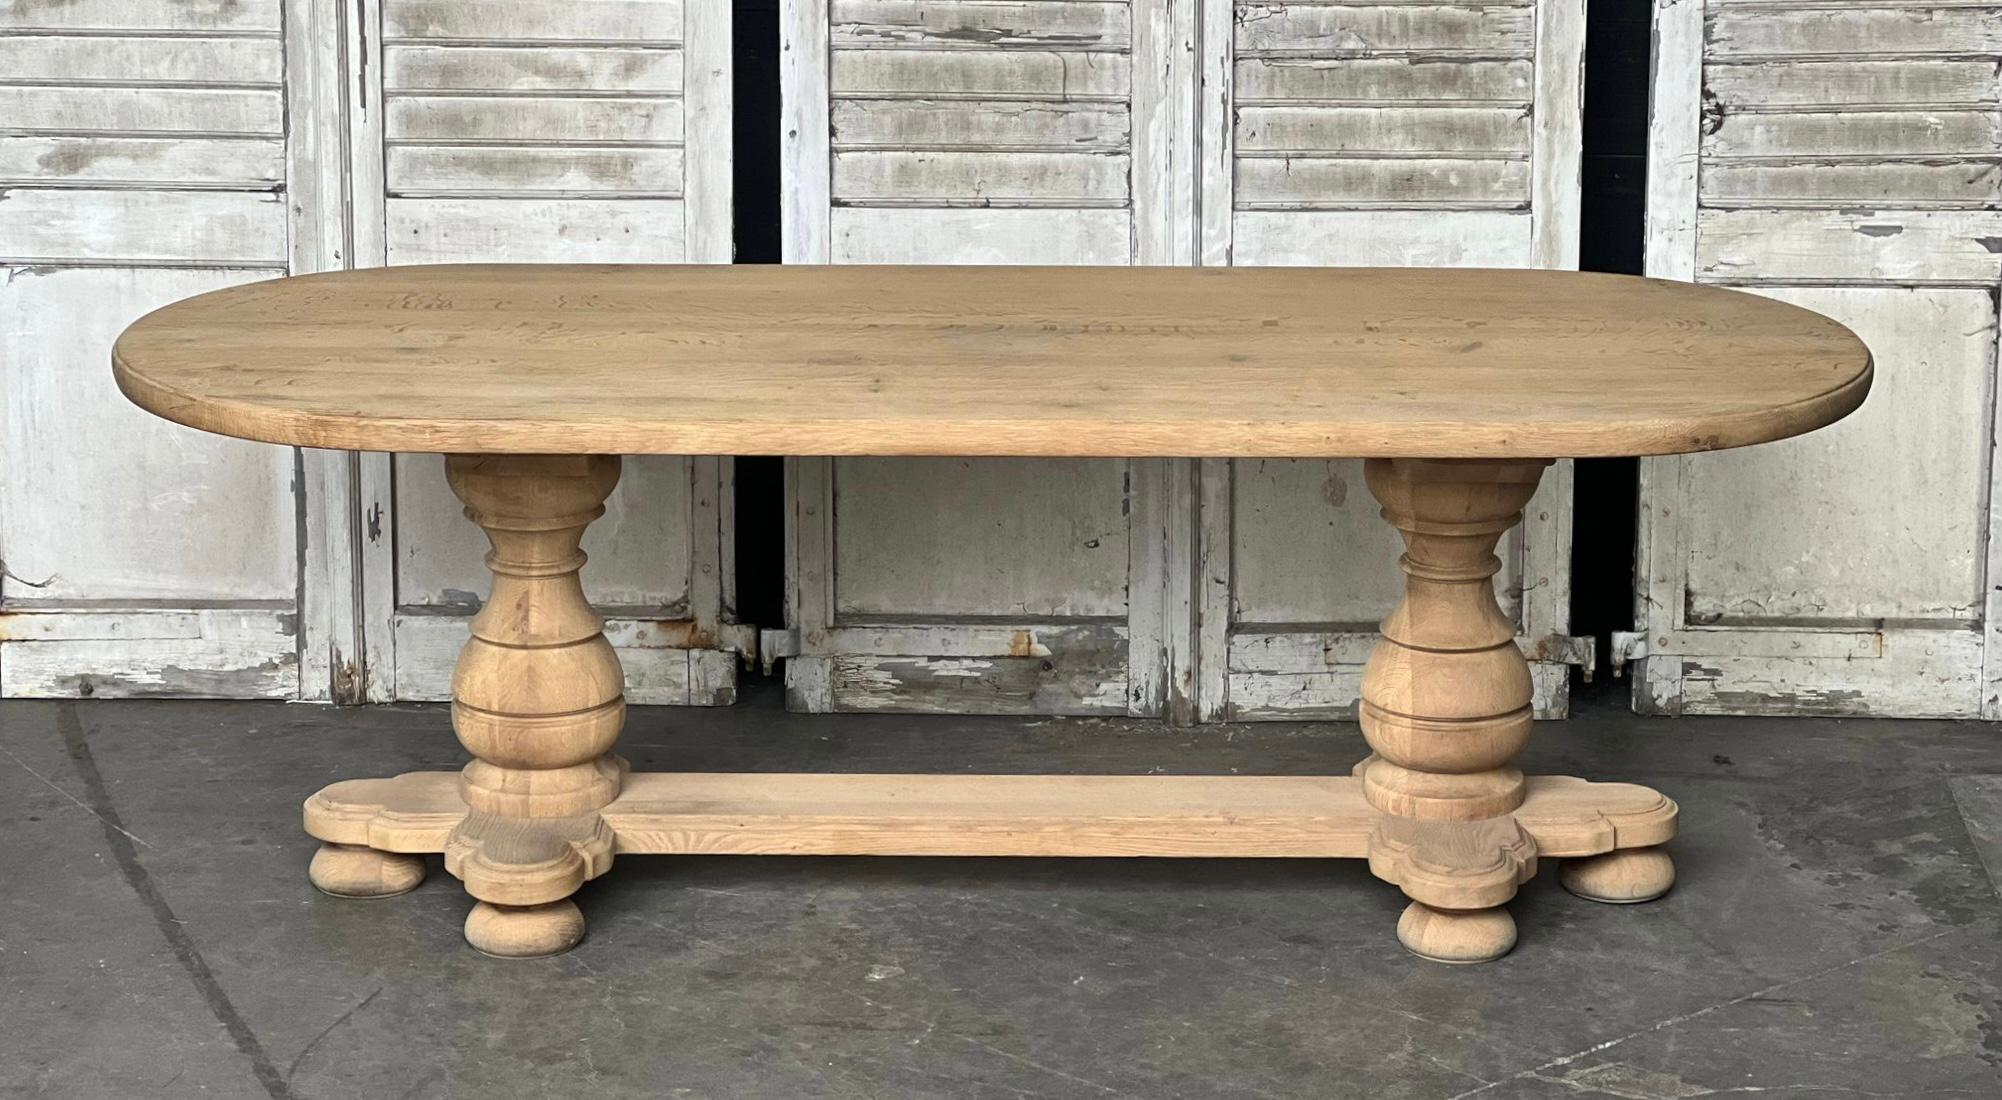 A wonderful shaped French Monastery Refectory dining table. Made from solid Oak and having a super ecclesiastical Base. An excellent quality table that will be around for generations to come. We have bleached it for a lighter look and in excellent